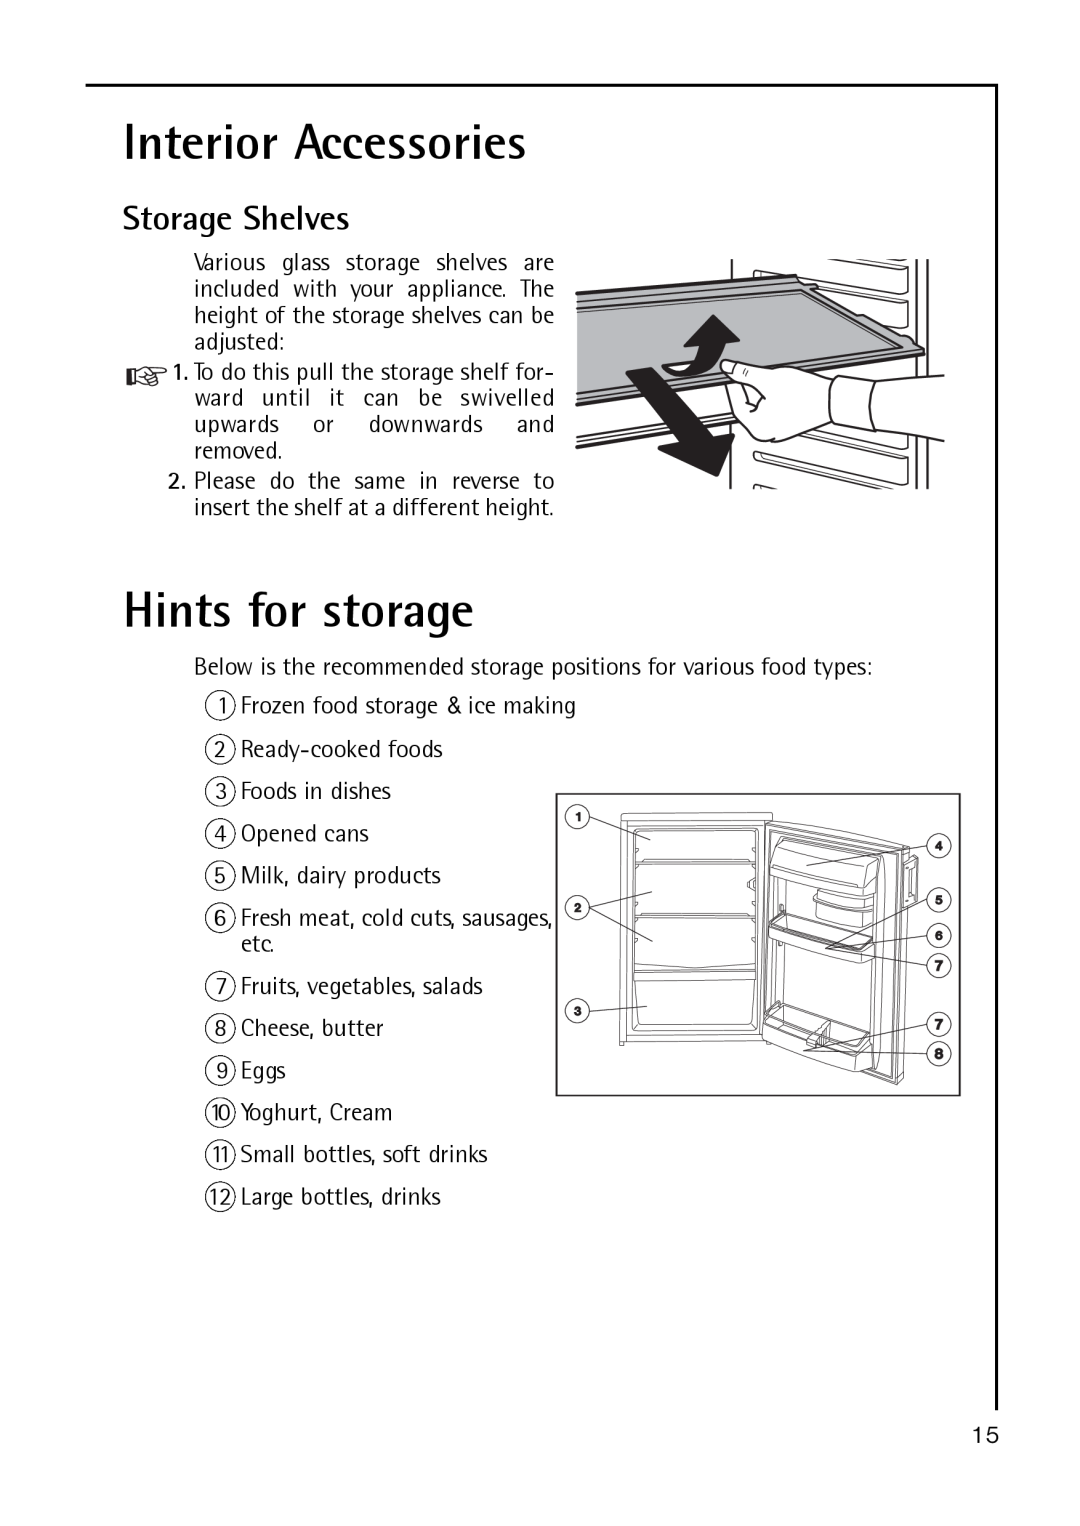 Electrolux S 70178 TK38 manual Interior Accessories, Hints for storage, Storage Shelves 